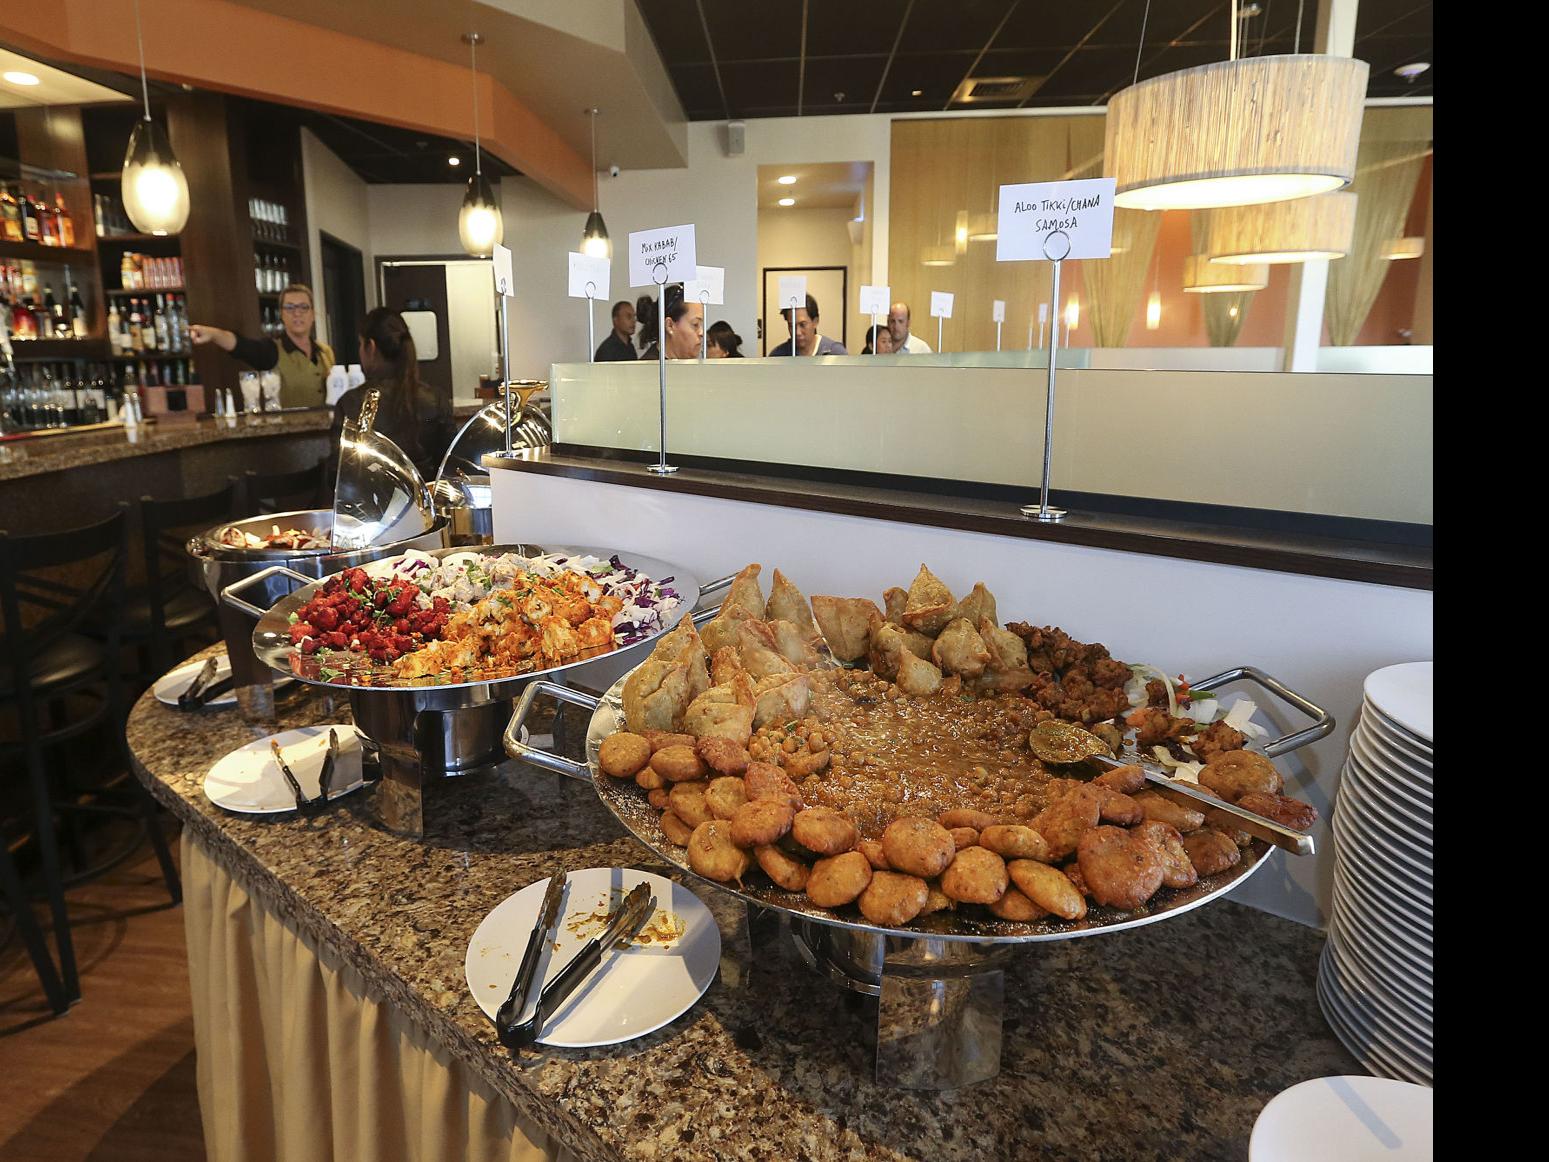 New Indian cuisine restaurant Viceroy opens in west Bakersfield | Food |  